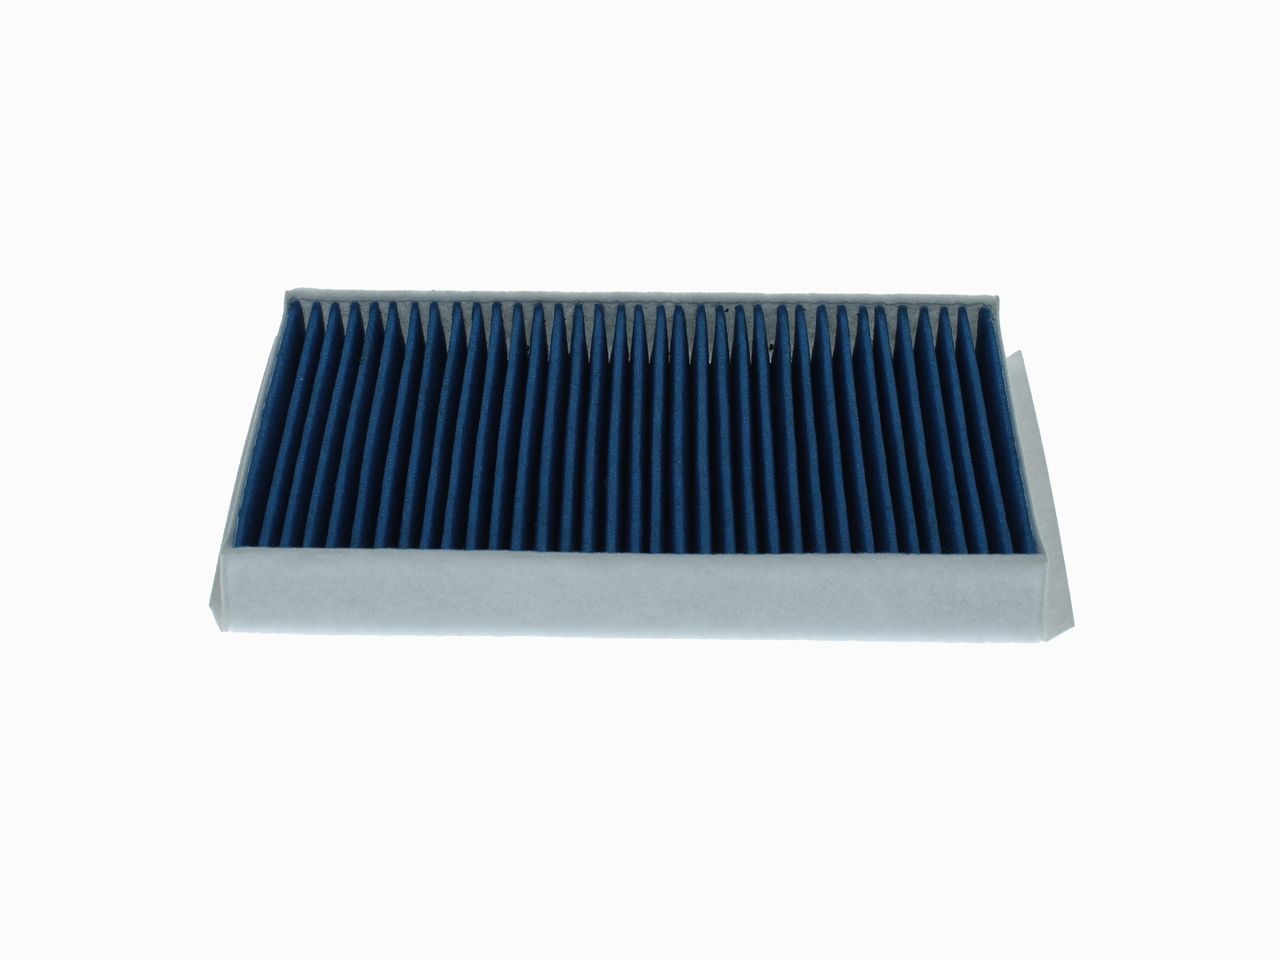 0986628661 Air con filter A 8661 BOSCH Activated Carbon Filter, with antibacterial action, Particle Separation Rate >98% for 2.5µm (fine matter), with anti-allergic effect, with antiviral effect, with fungicidal effect, 276 mm x 194 mm x 31 mm